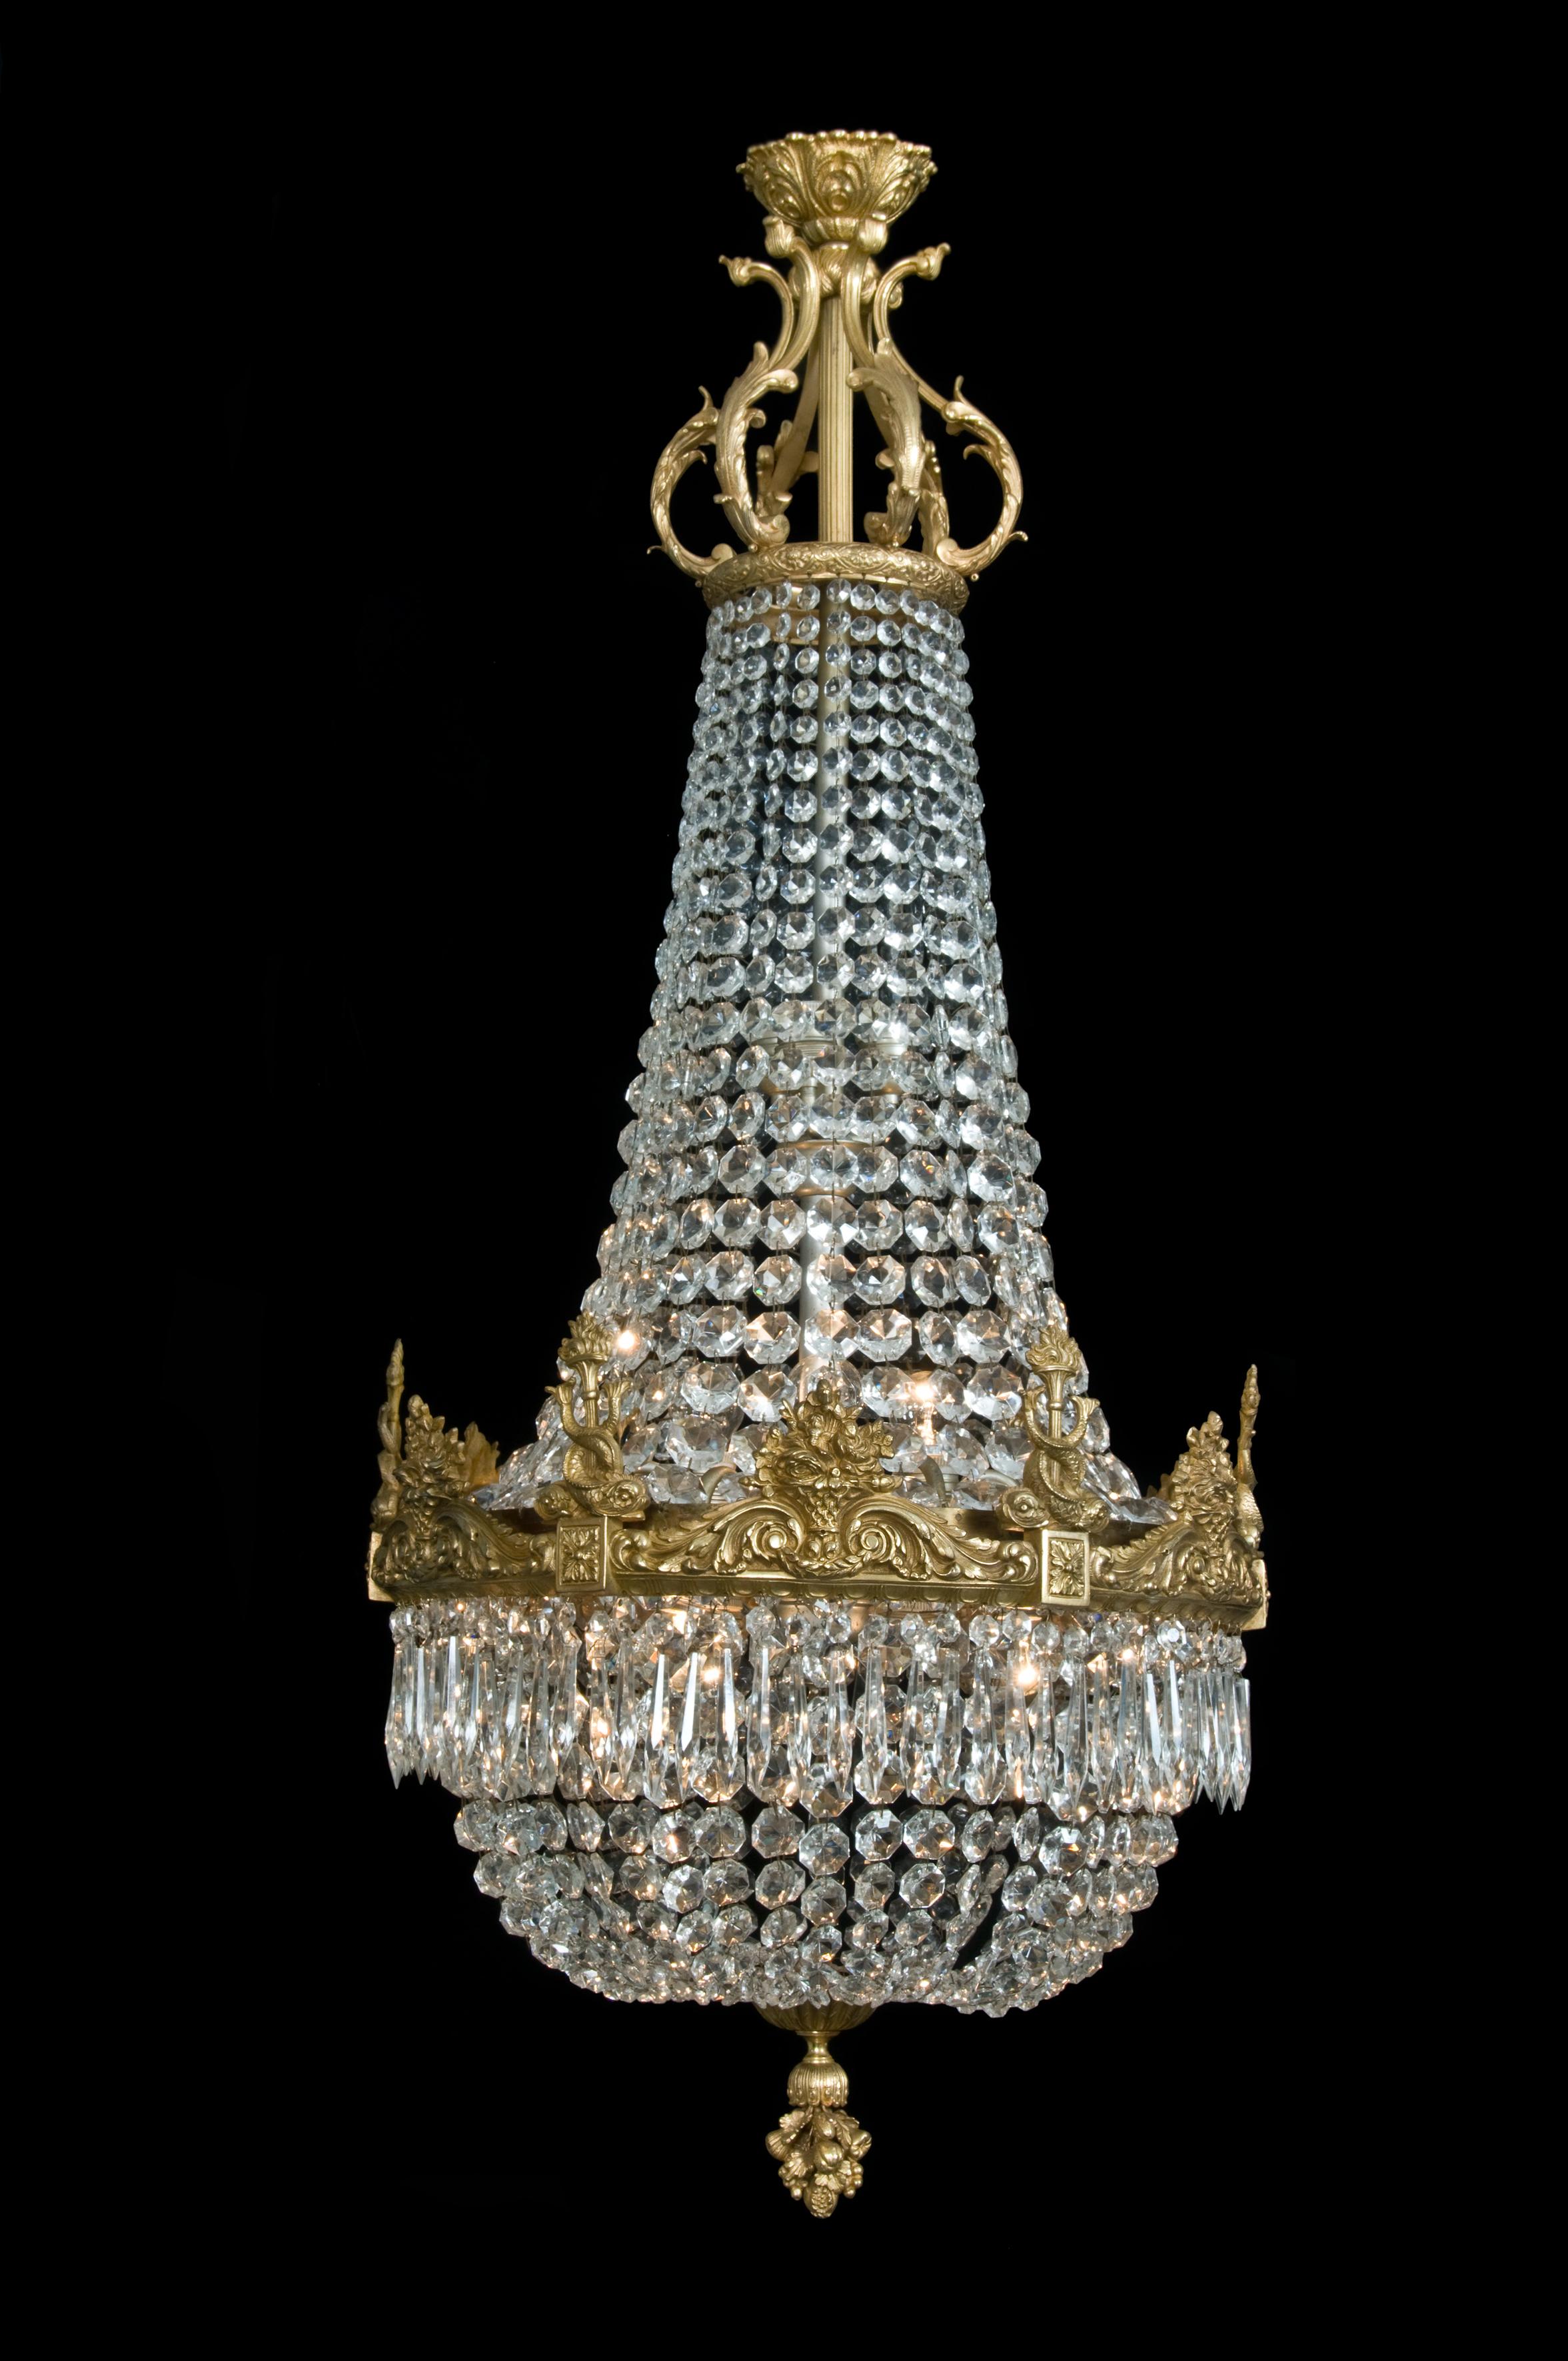 A fine gilt-bronze cut-glass tent and bag chandelier with finely cast entwined dolphins.

French, circa 1900.

This fine chandelier has a gilt-bronze acanthus corona above a foliate band, from which is suspended chains of graduated octagonal